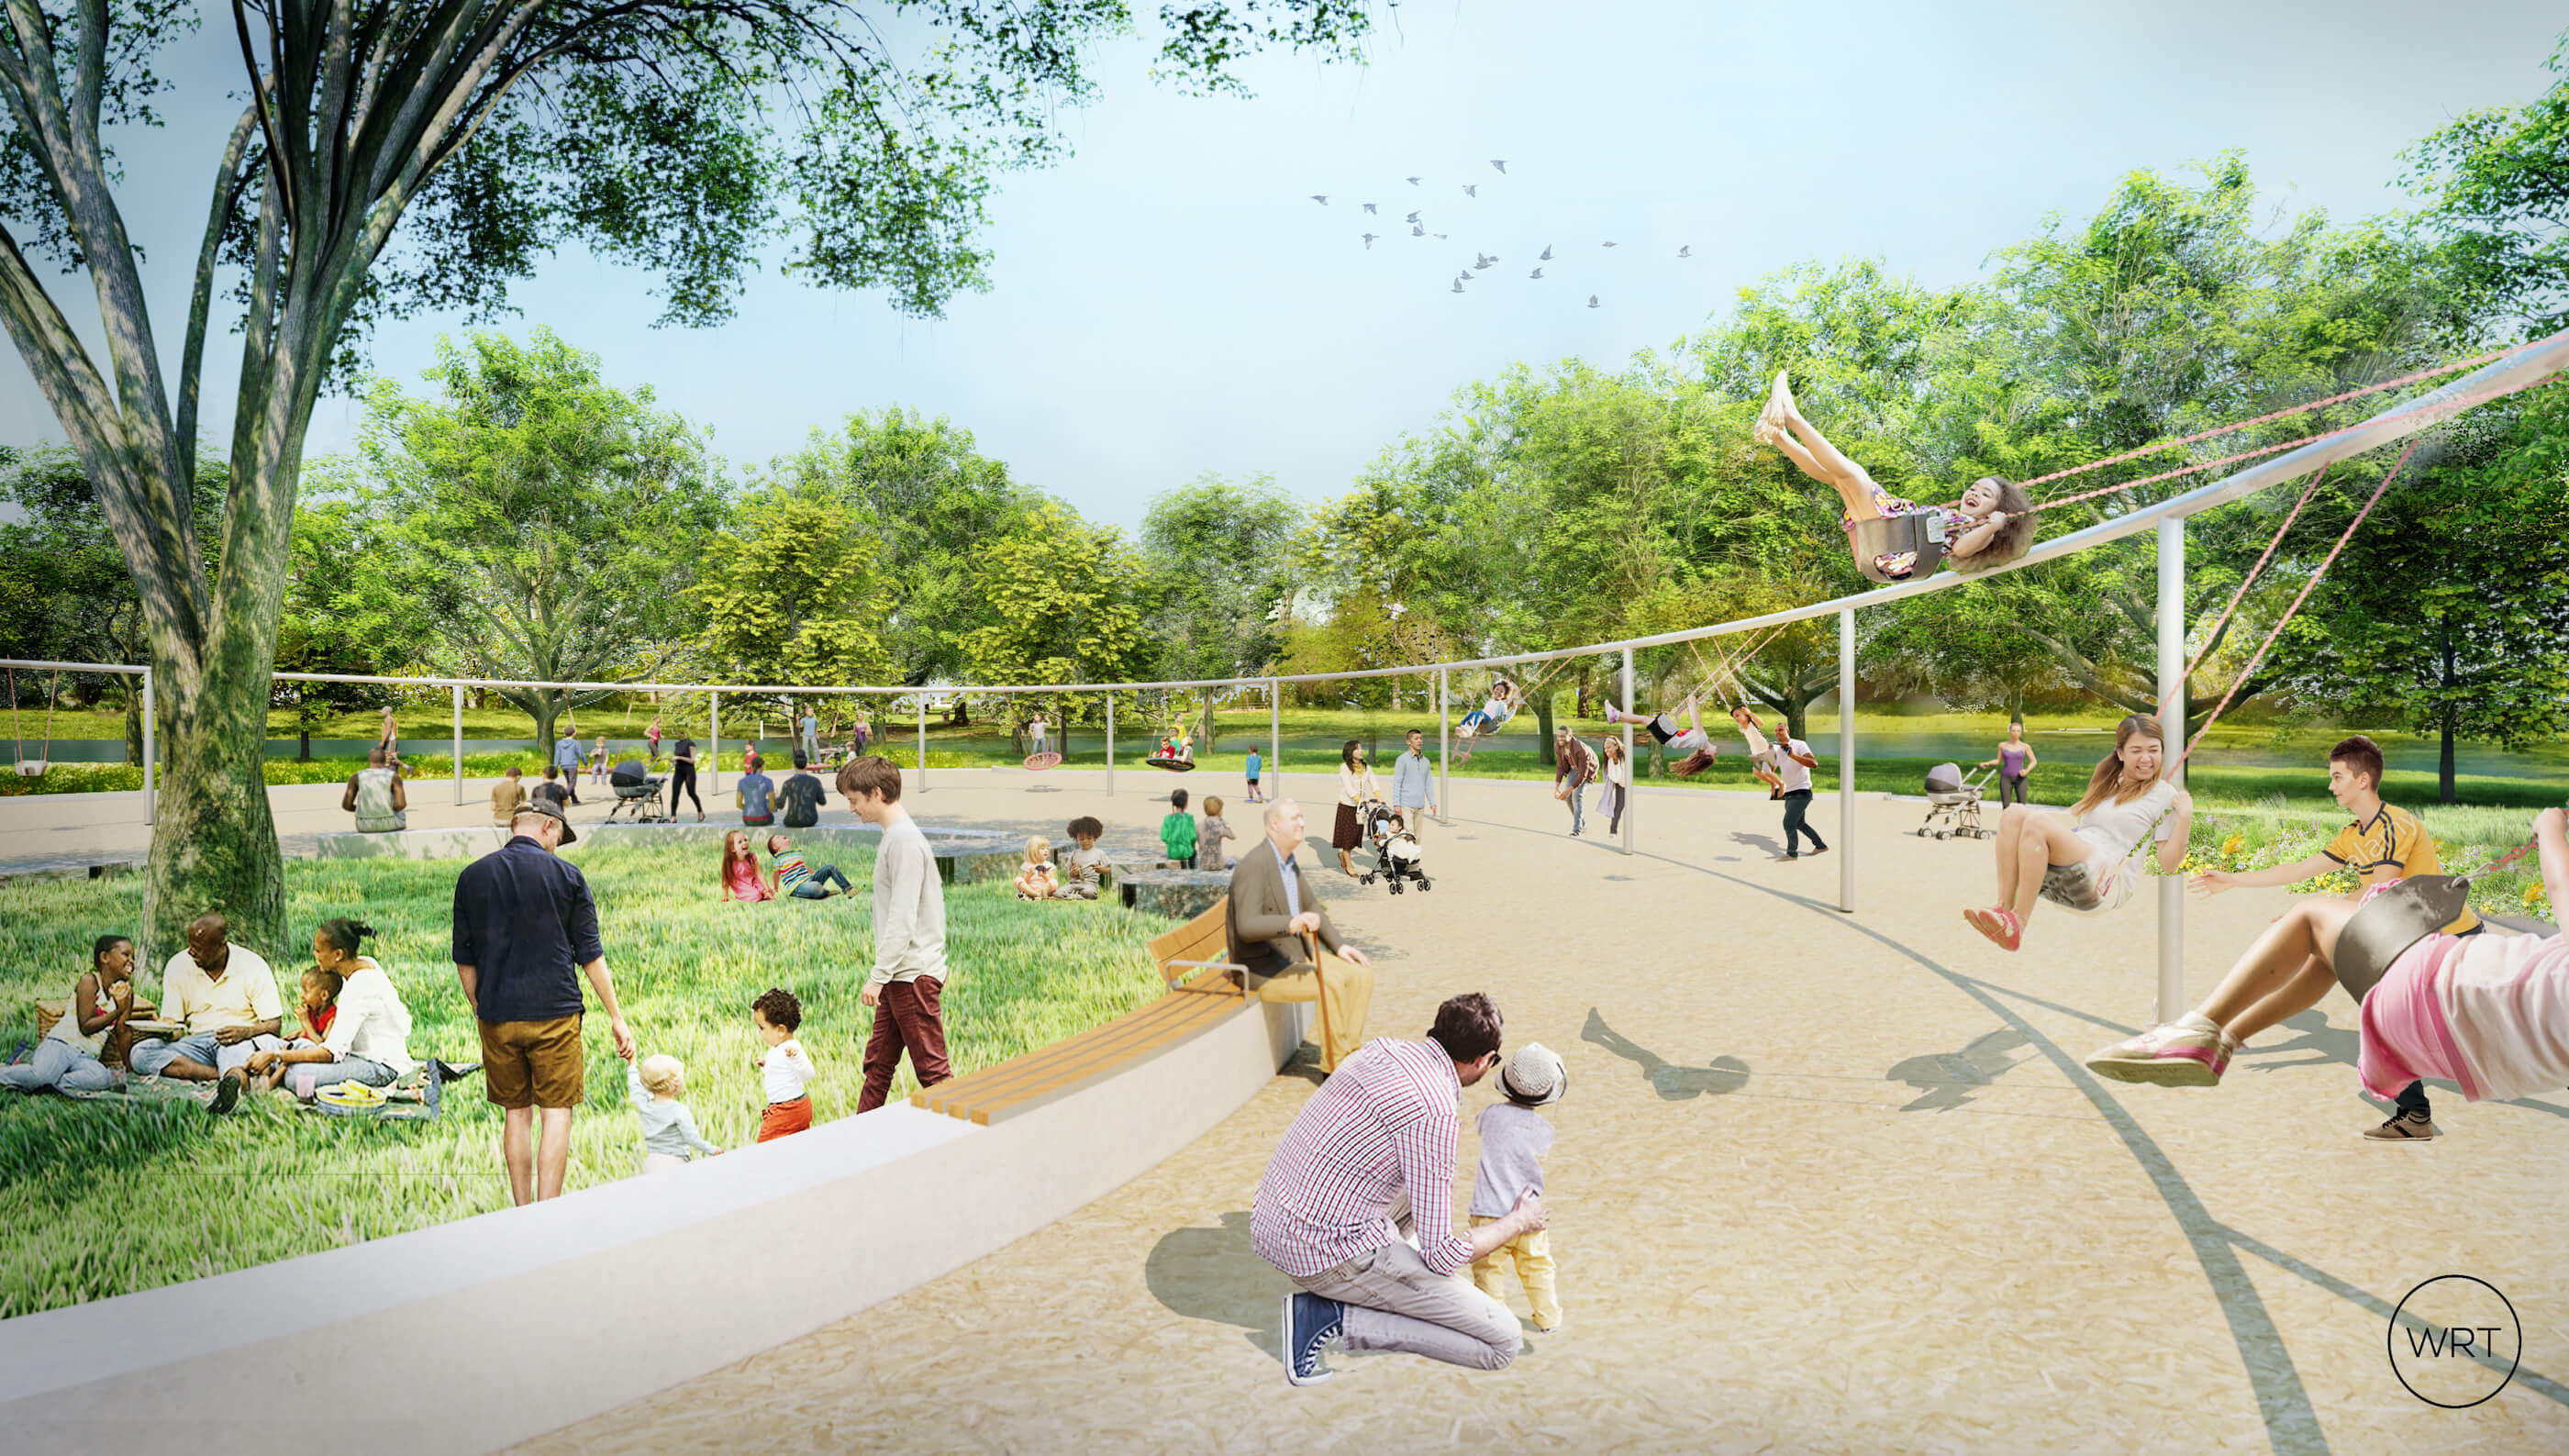 rendering of a large swing structure at a park